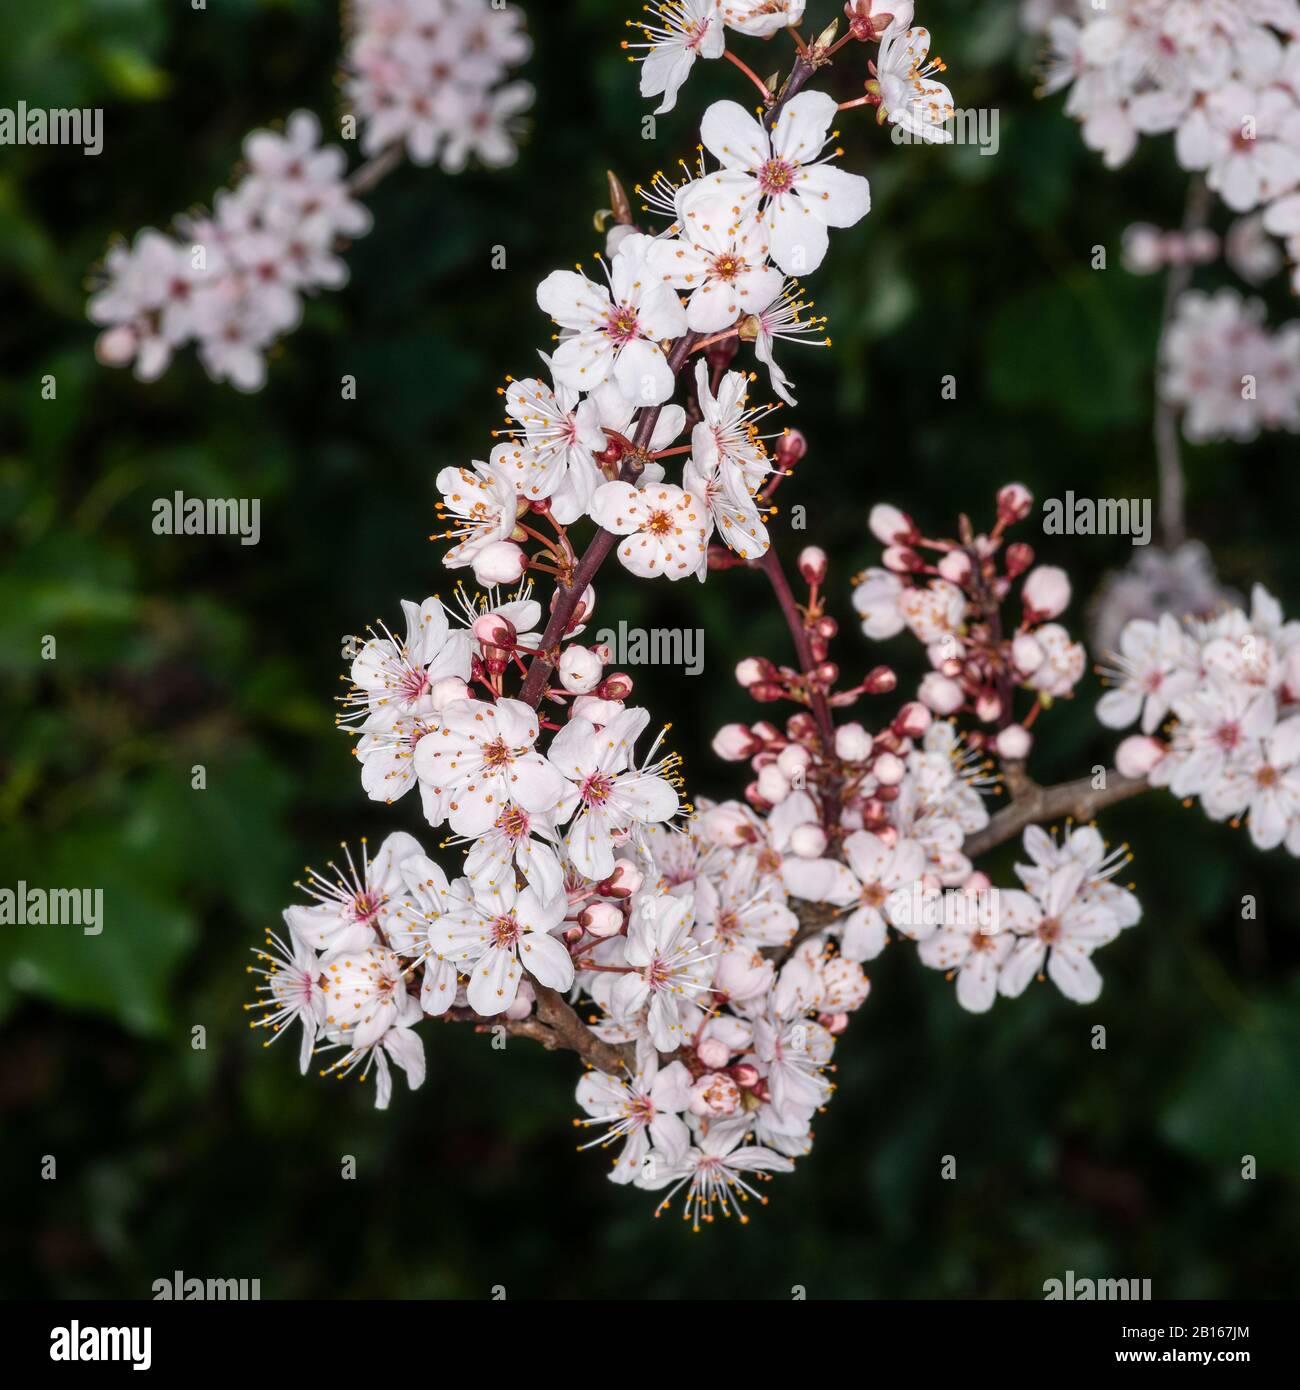 Pink winter flowering ornamental cherry blossom close up. Stock Photo